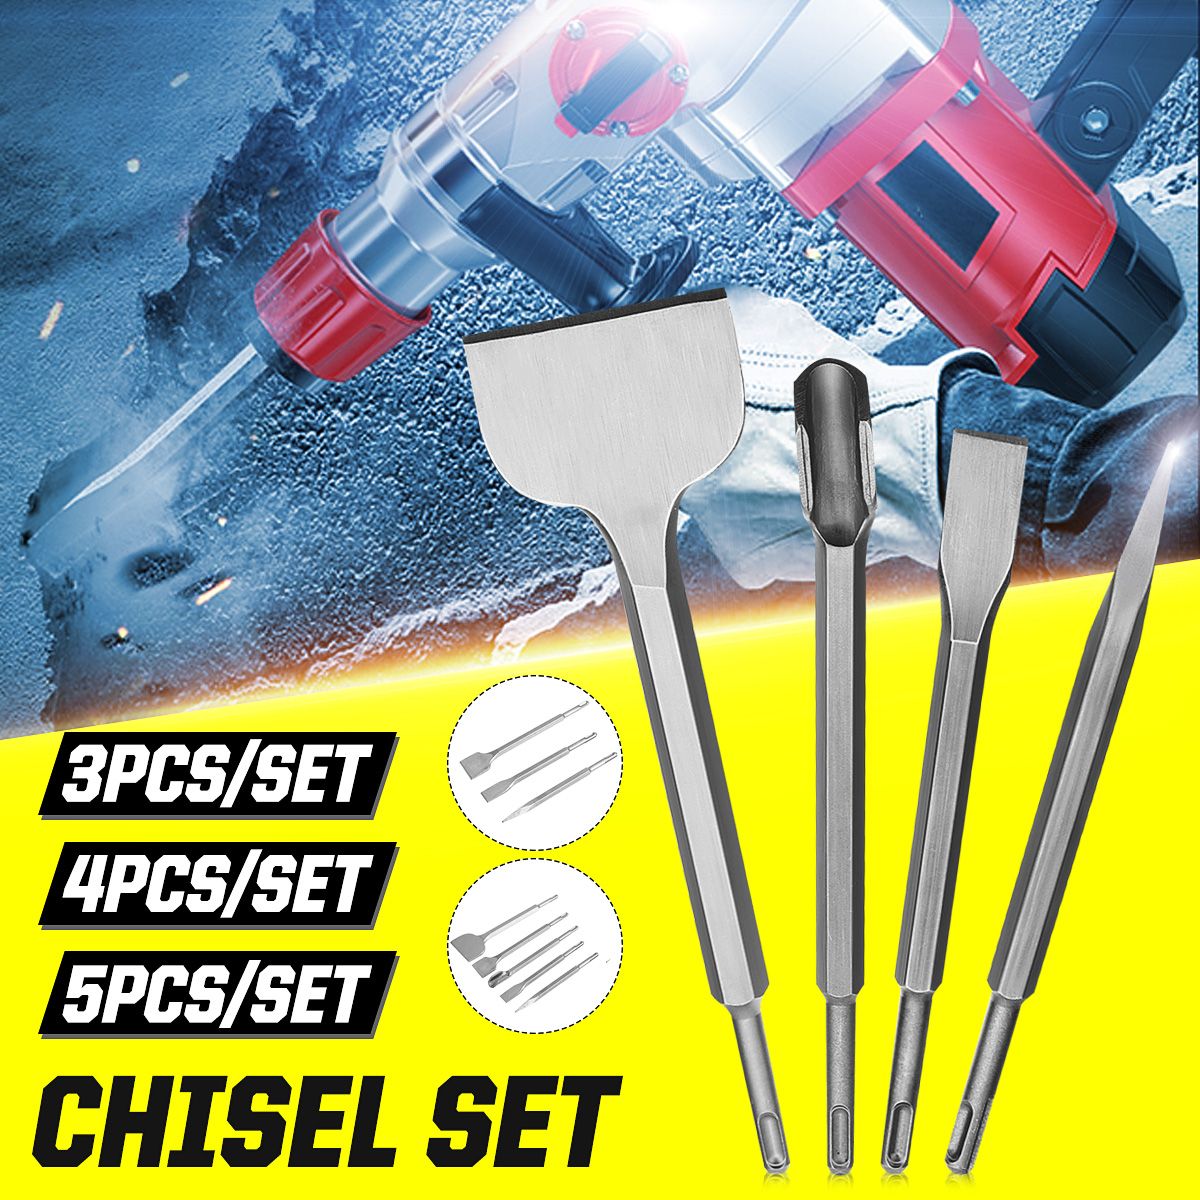 Electric-Hammer-Chisel-Rotary-Bits-Set-Fit-for-Concrete-Hydropower-Drill-Tool-1691778